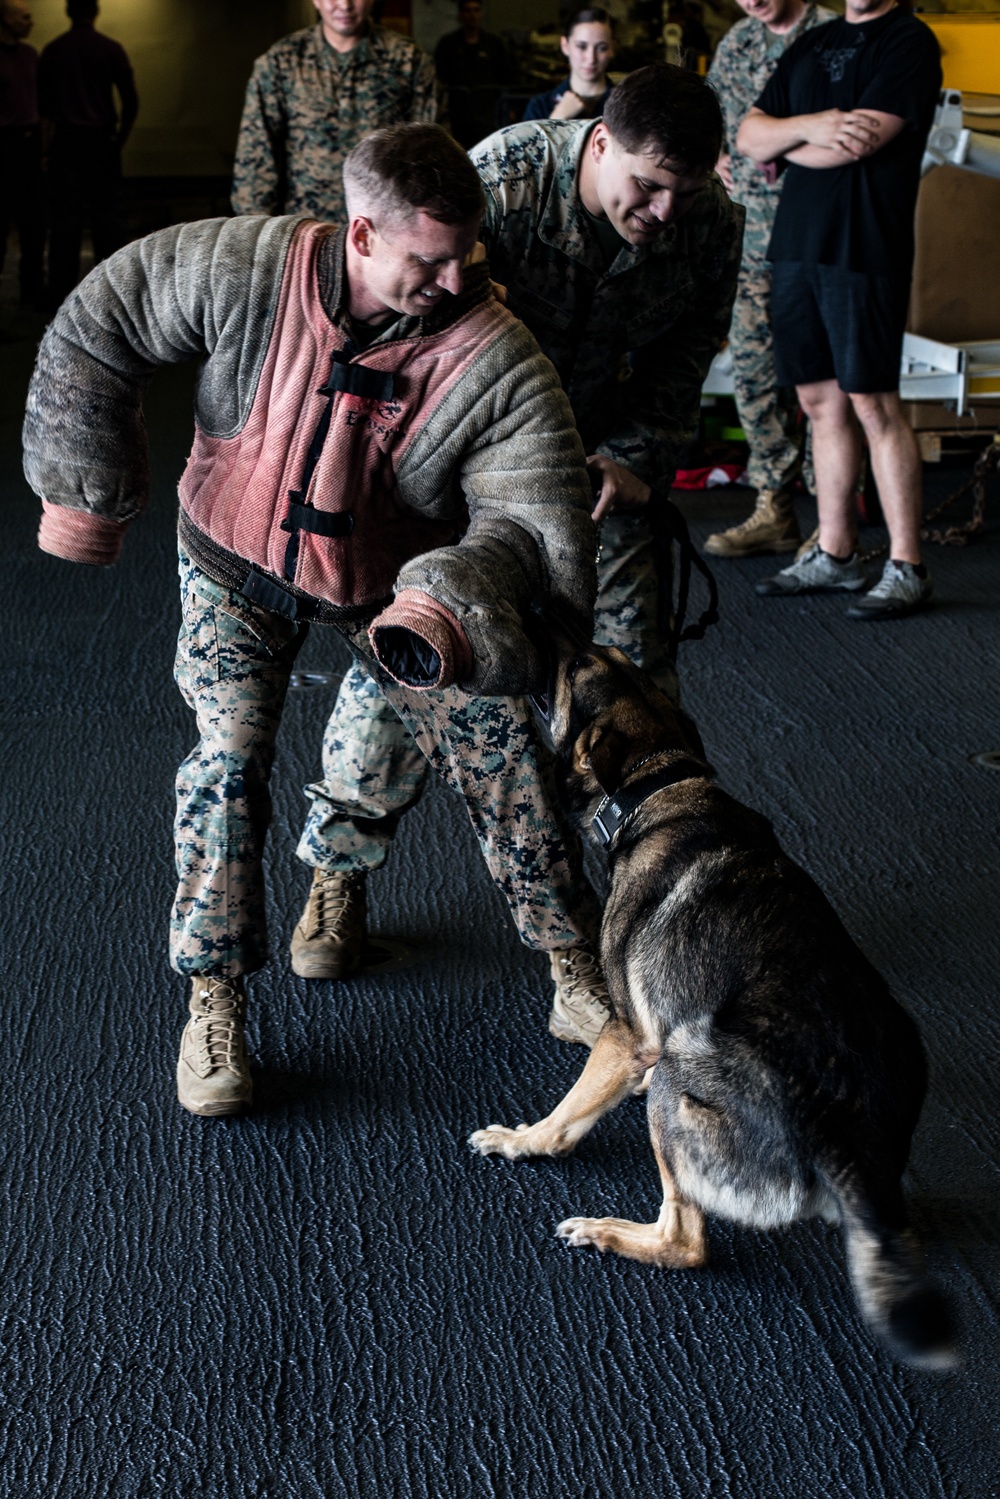 Jack-Jack bites back: Marines with the 31st MEU participate in bite drills